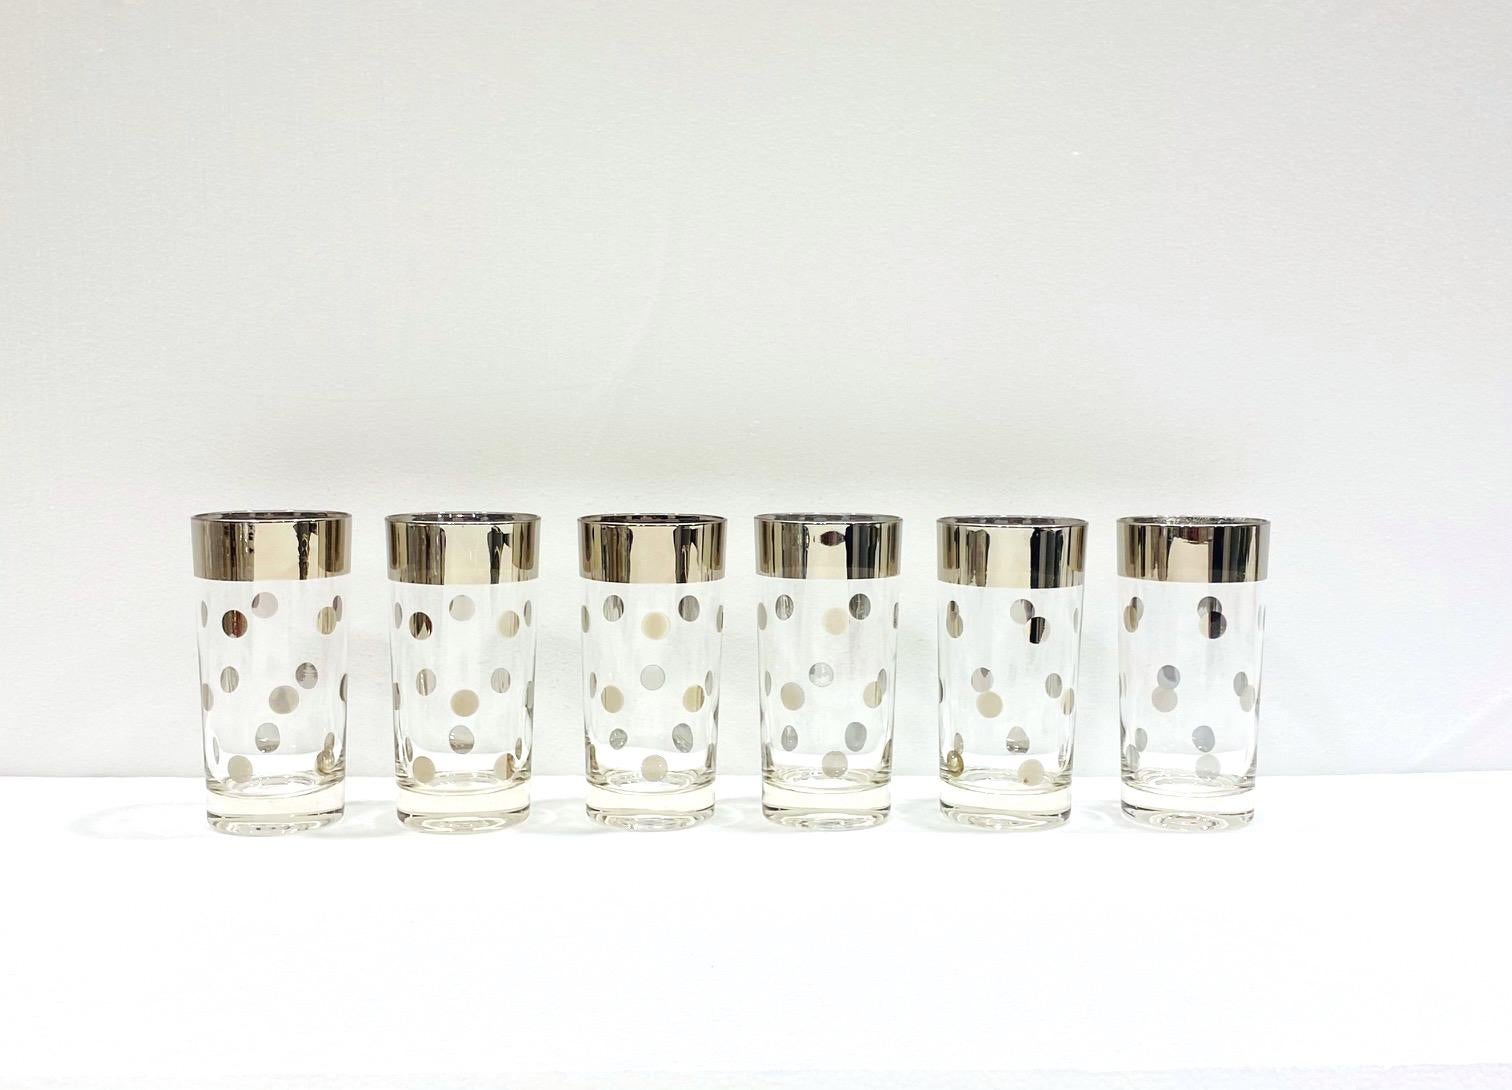 Set of six vintage highball or Tom Collins cocktail glasses from the iconic Mid-Century Modern designer, Dorothy Thorpe. Barware glasses feature sleek cylinder forms with silver polka dots and silver overlay rims, for which Thorpe is recognized and